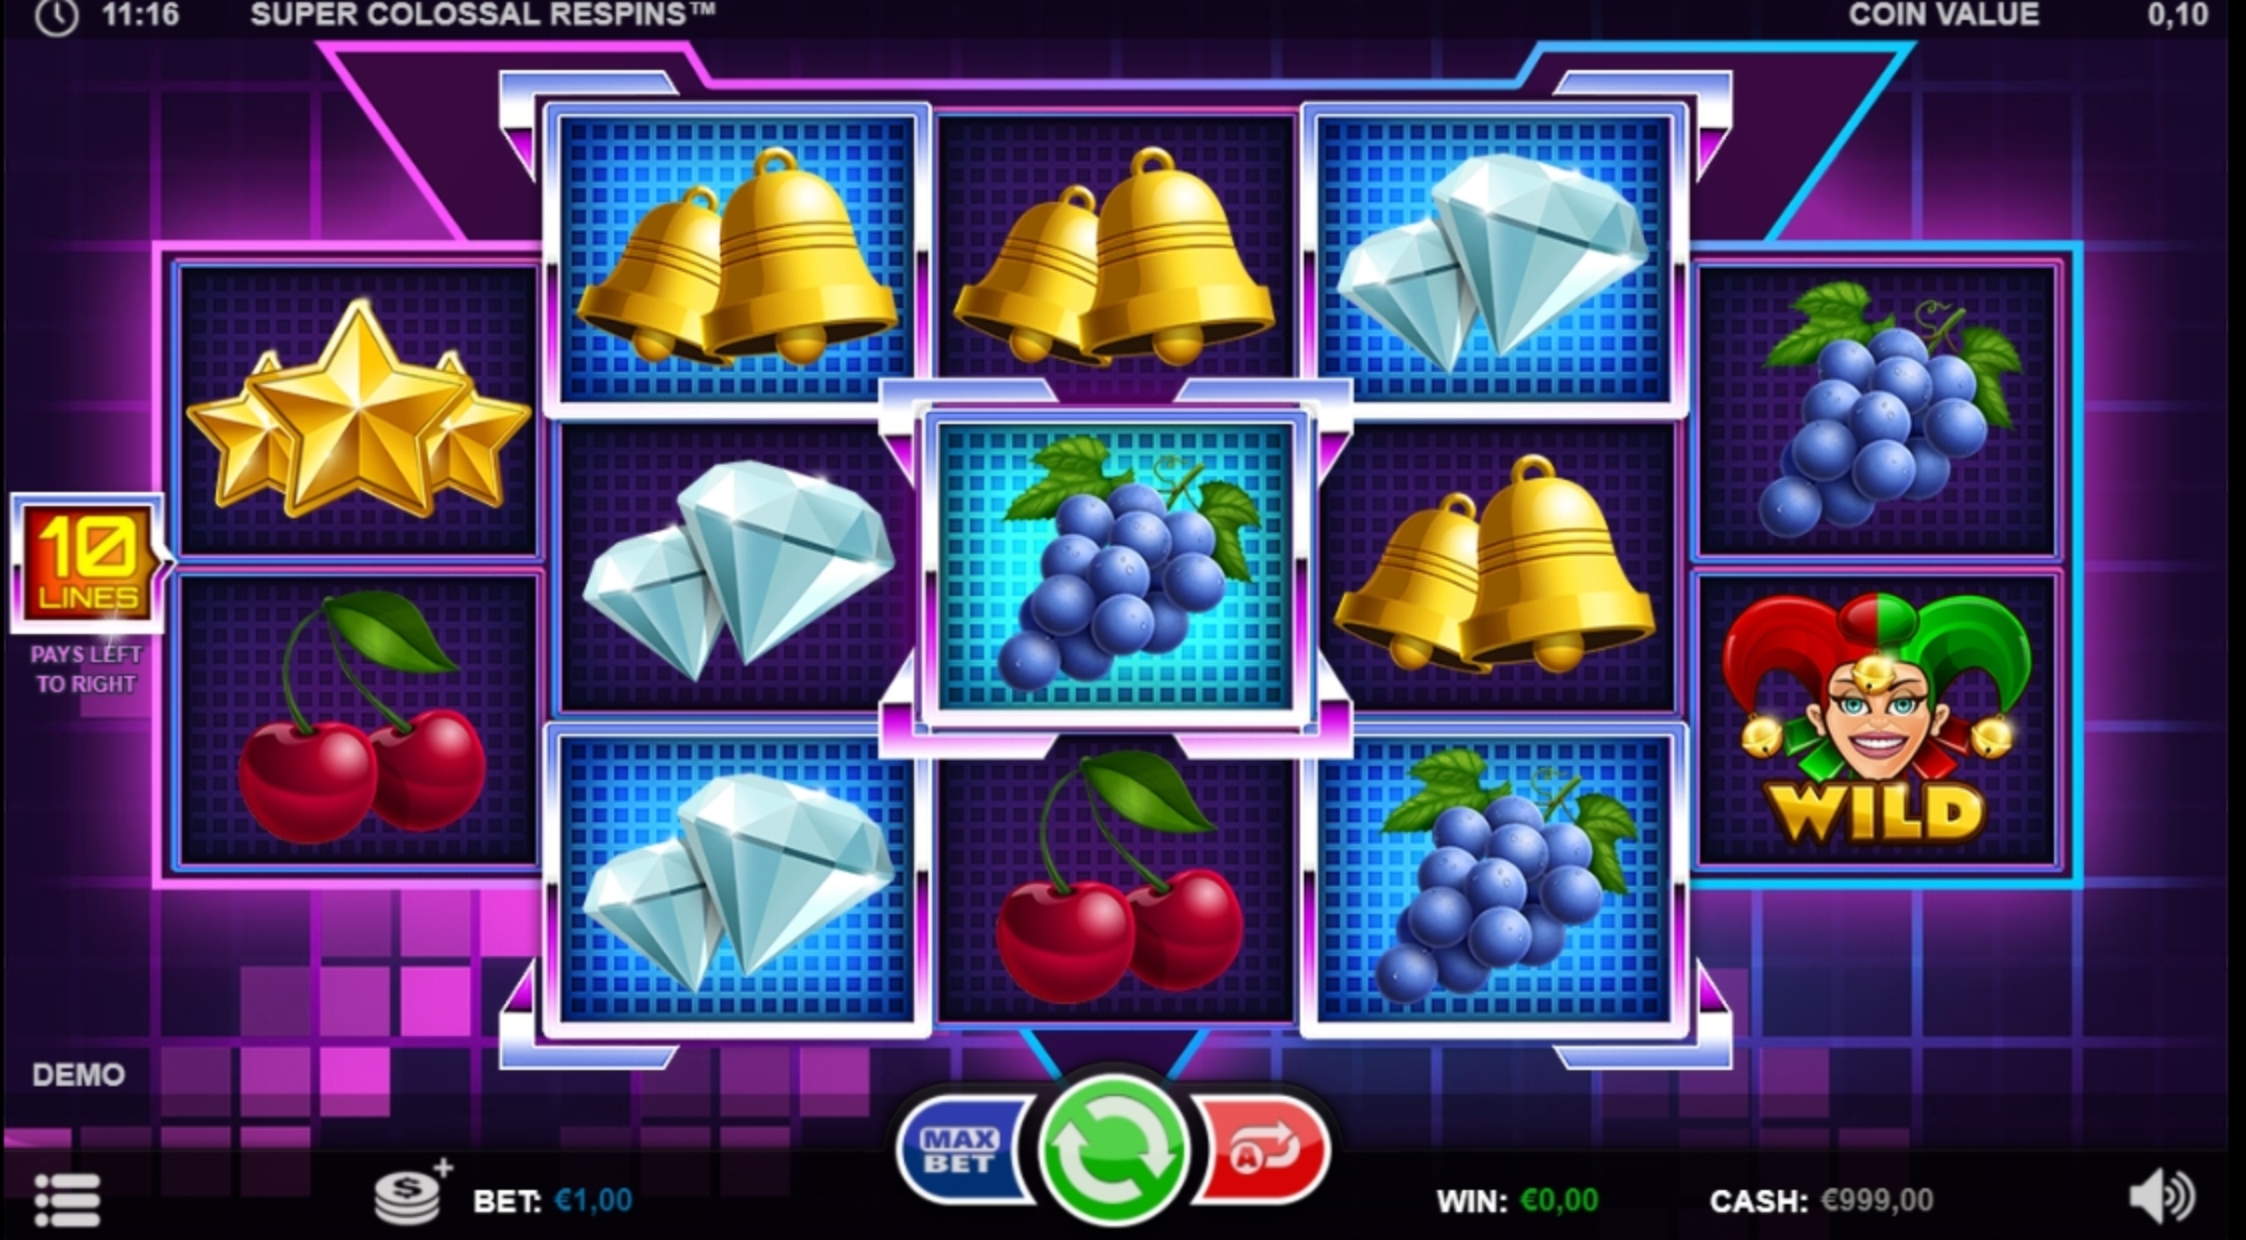 Reels in Super Colossal Respins Slot Game by Games Inc